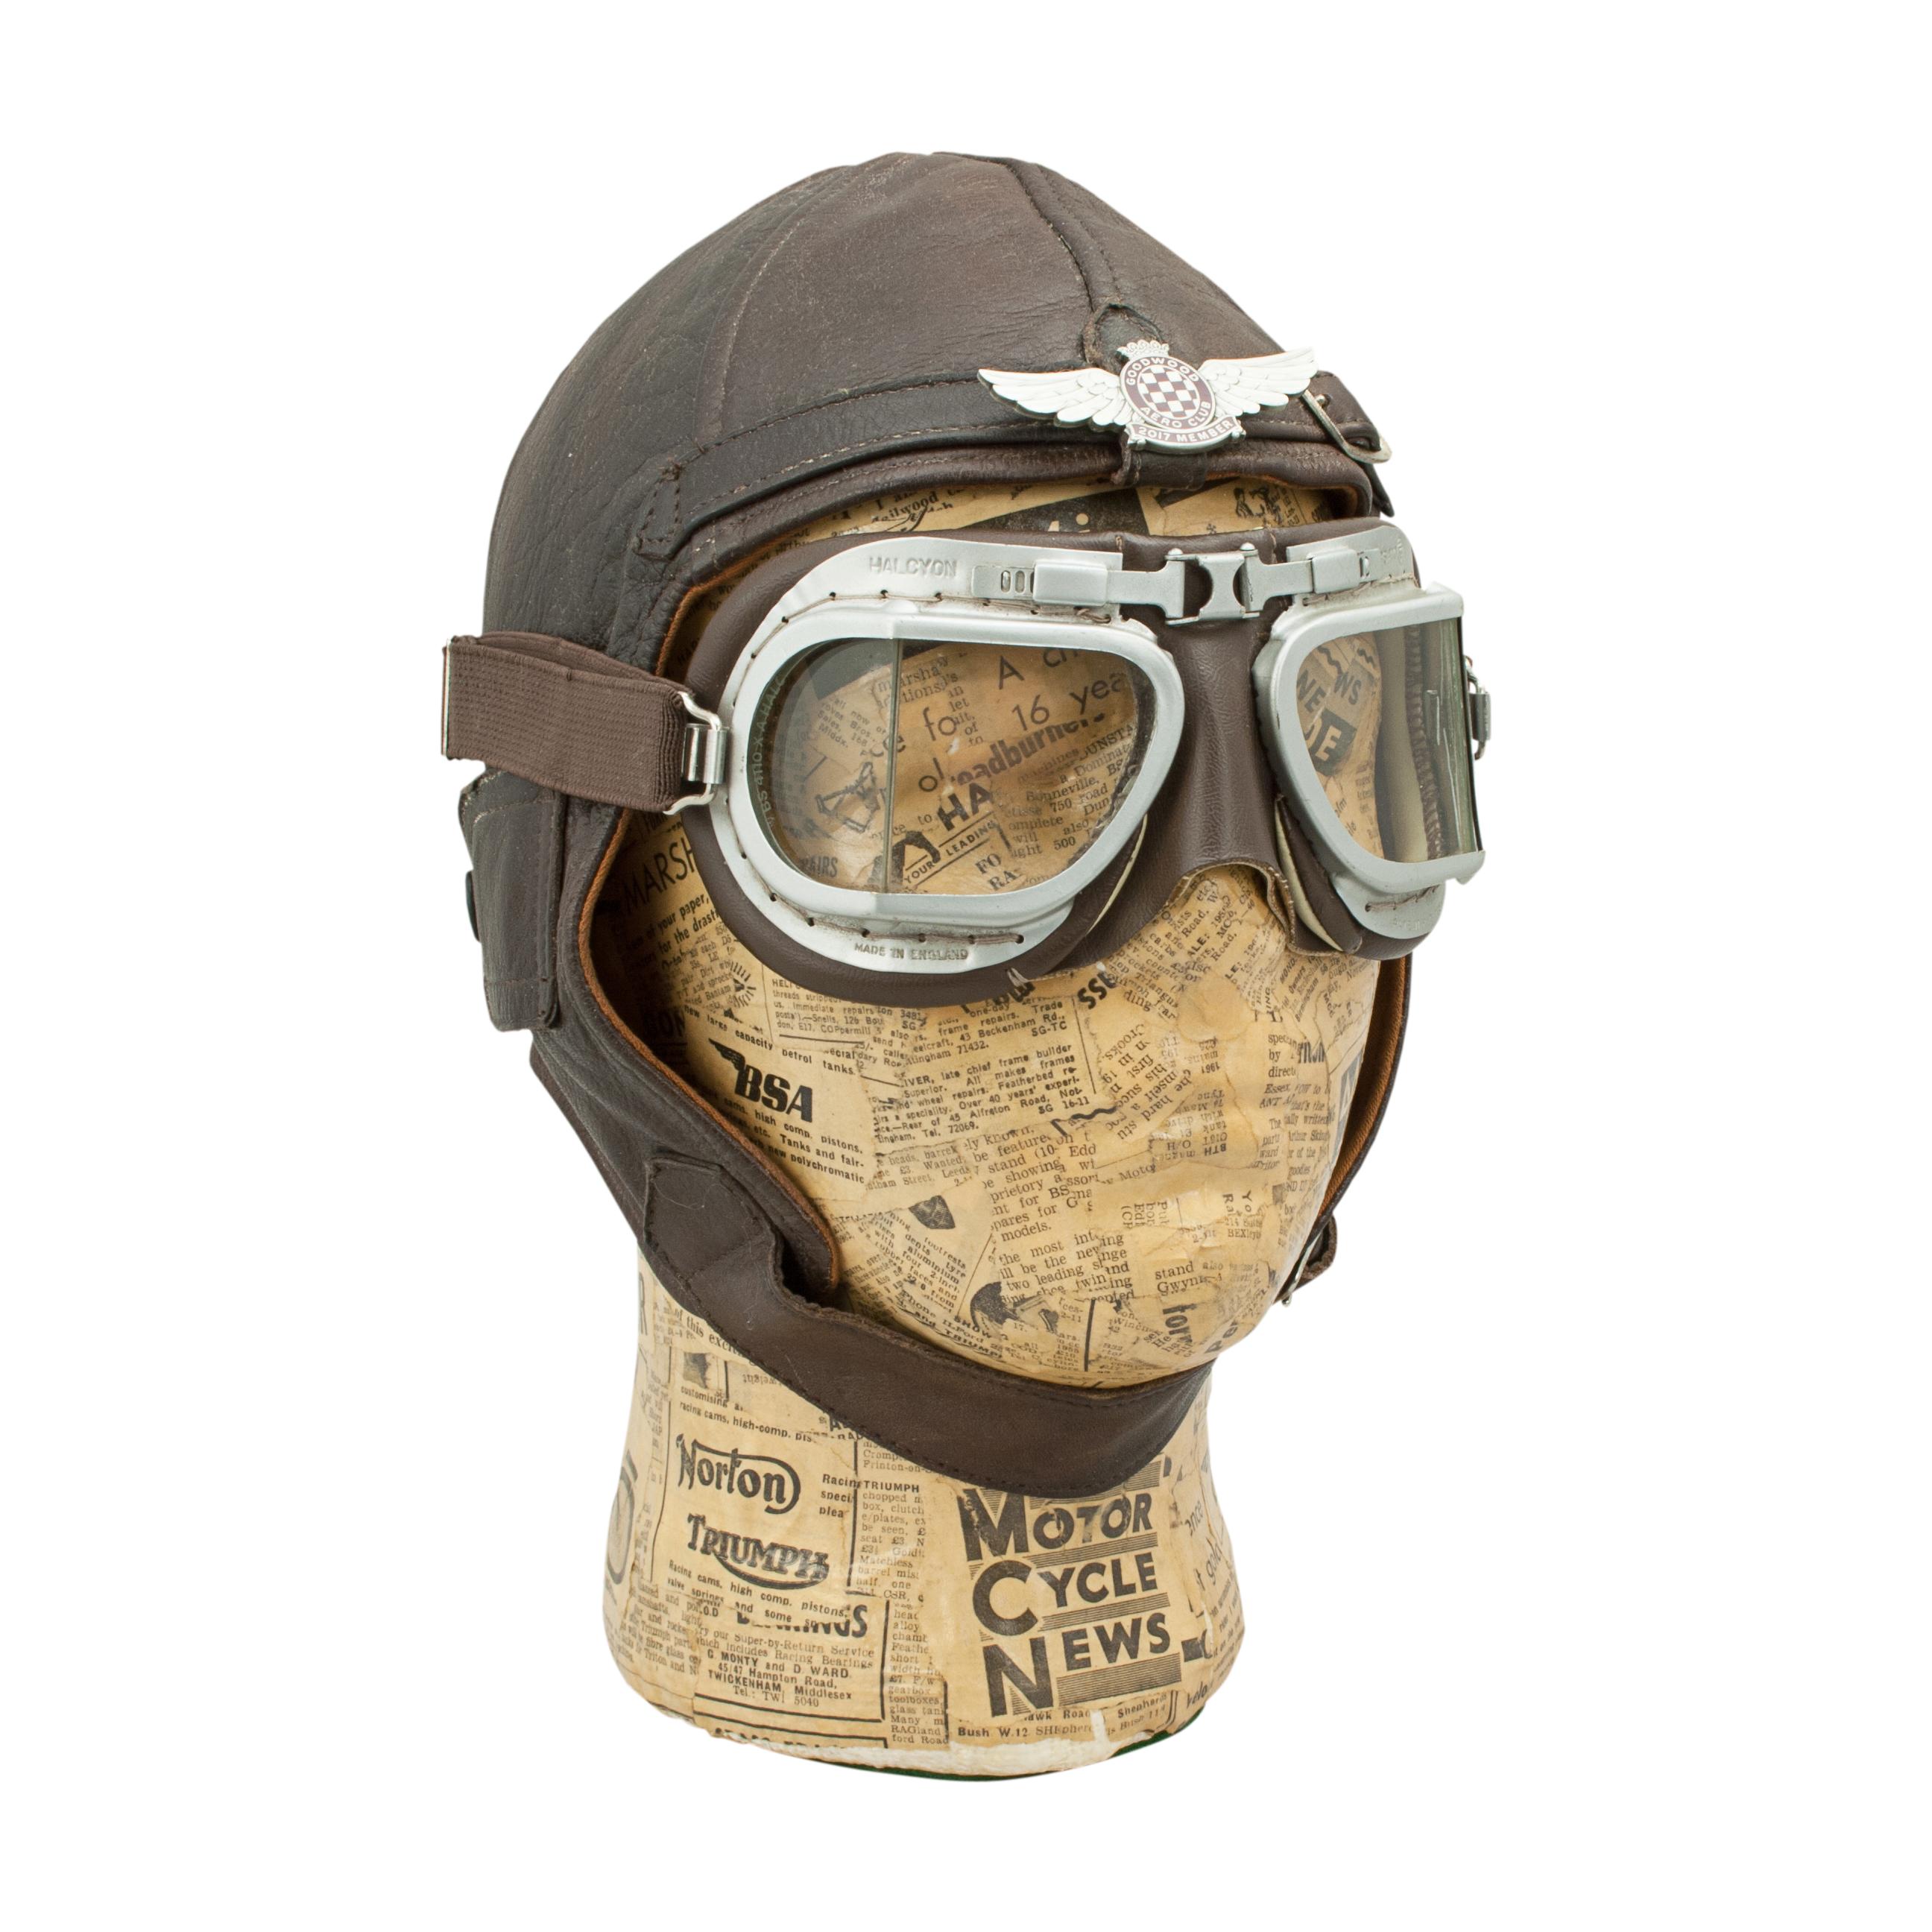 Leather Flying Helmet.
A lightweight leather flying helmet made from supple dark brown leather with a brown cloth lining. The WWII style leather aviator pilots cap has covered earflaps with popper fastening, goggle loop at the rear, adjustable